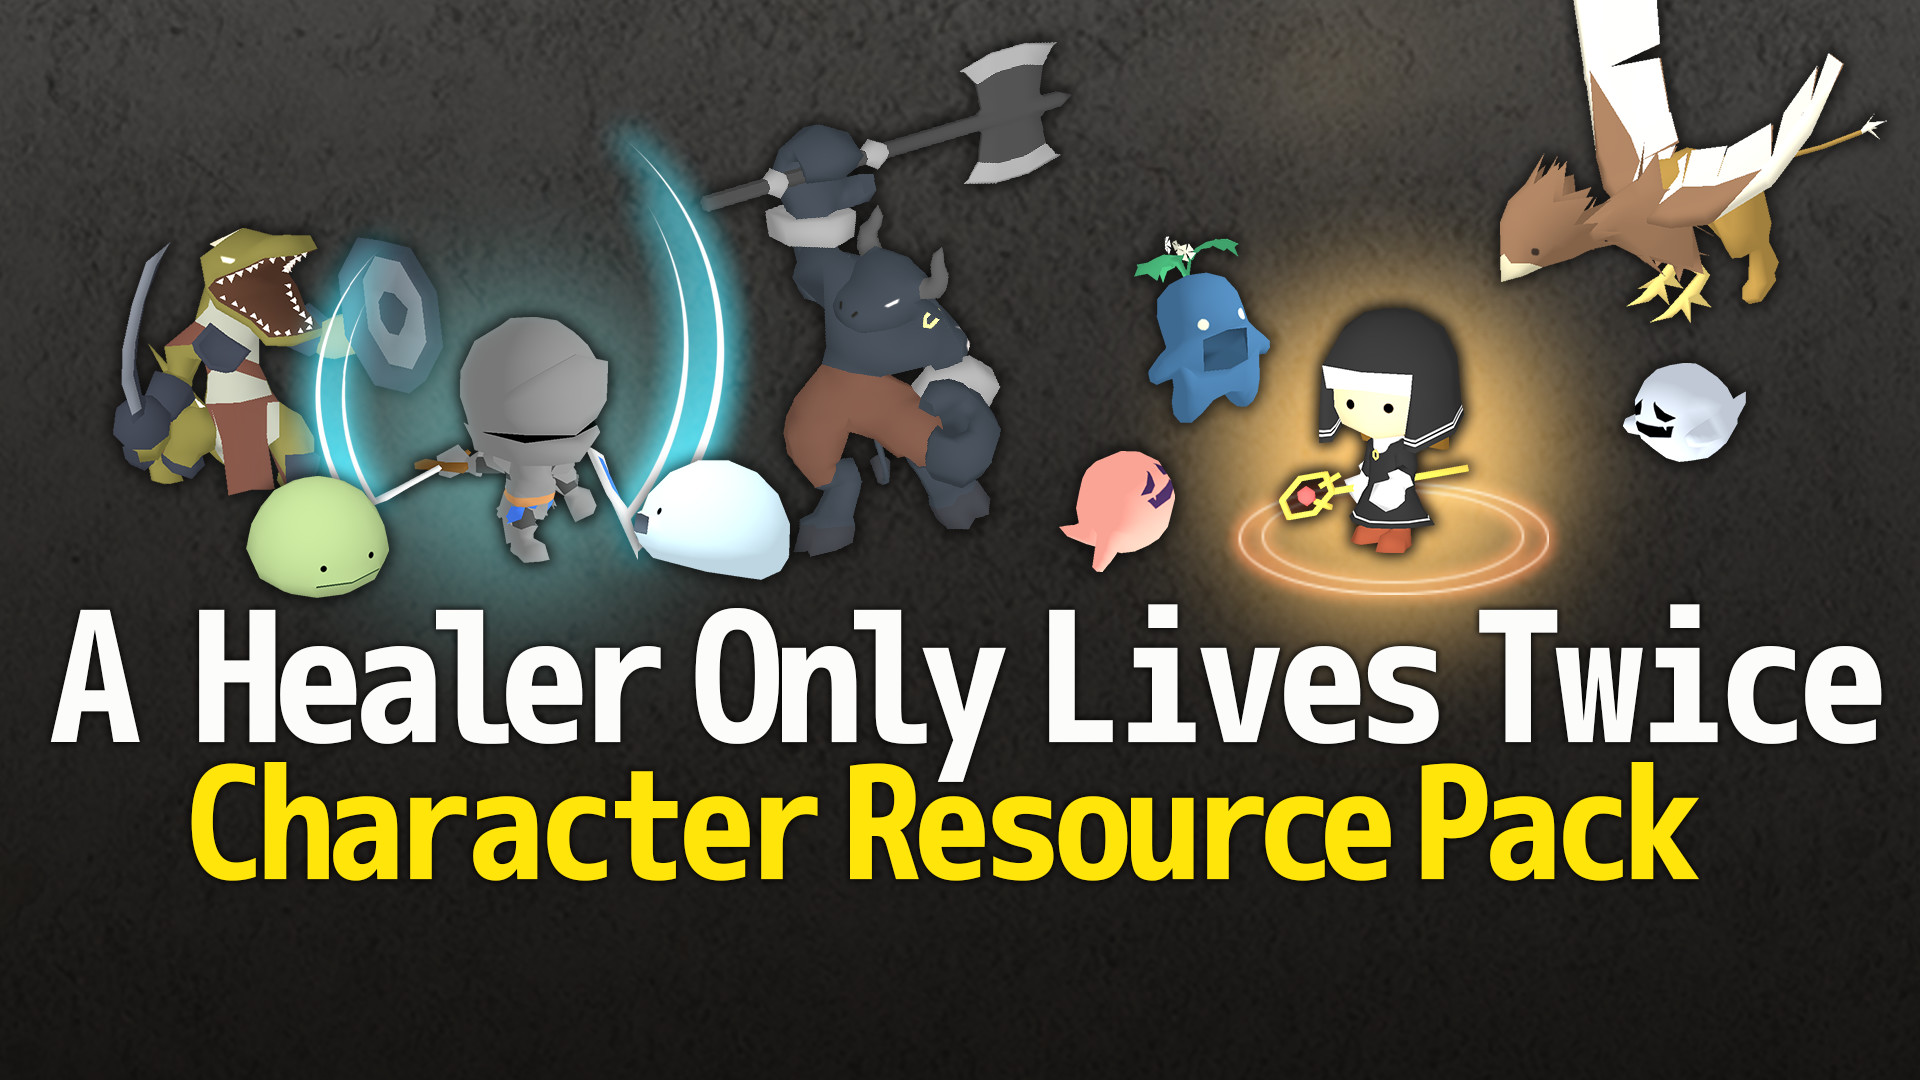 SMILE GAME BUILDER A Healer Only Lives Twice Character Resource Pack Featured Screenshot #1